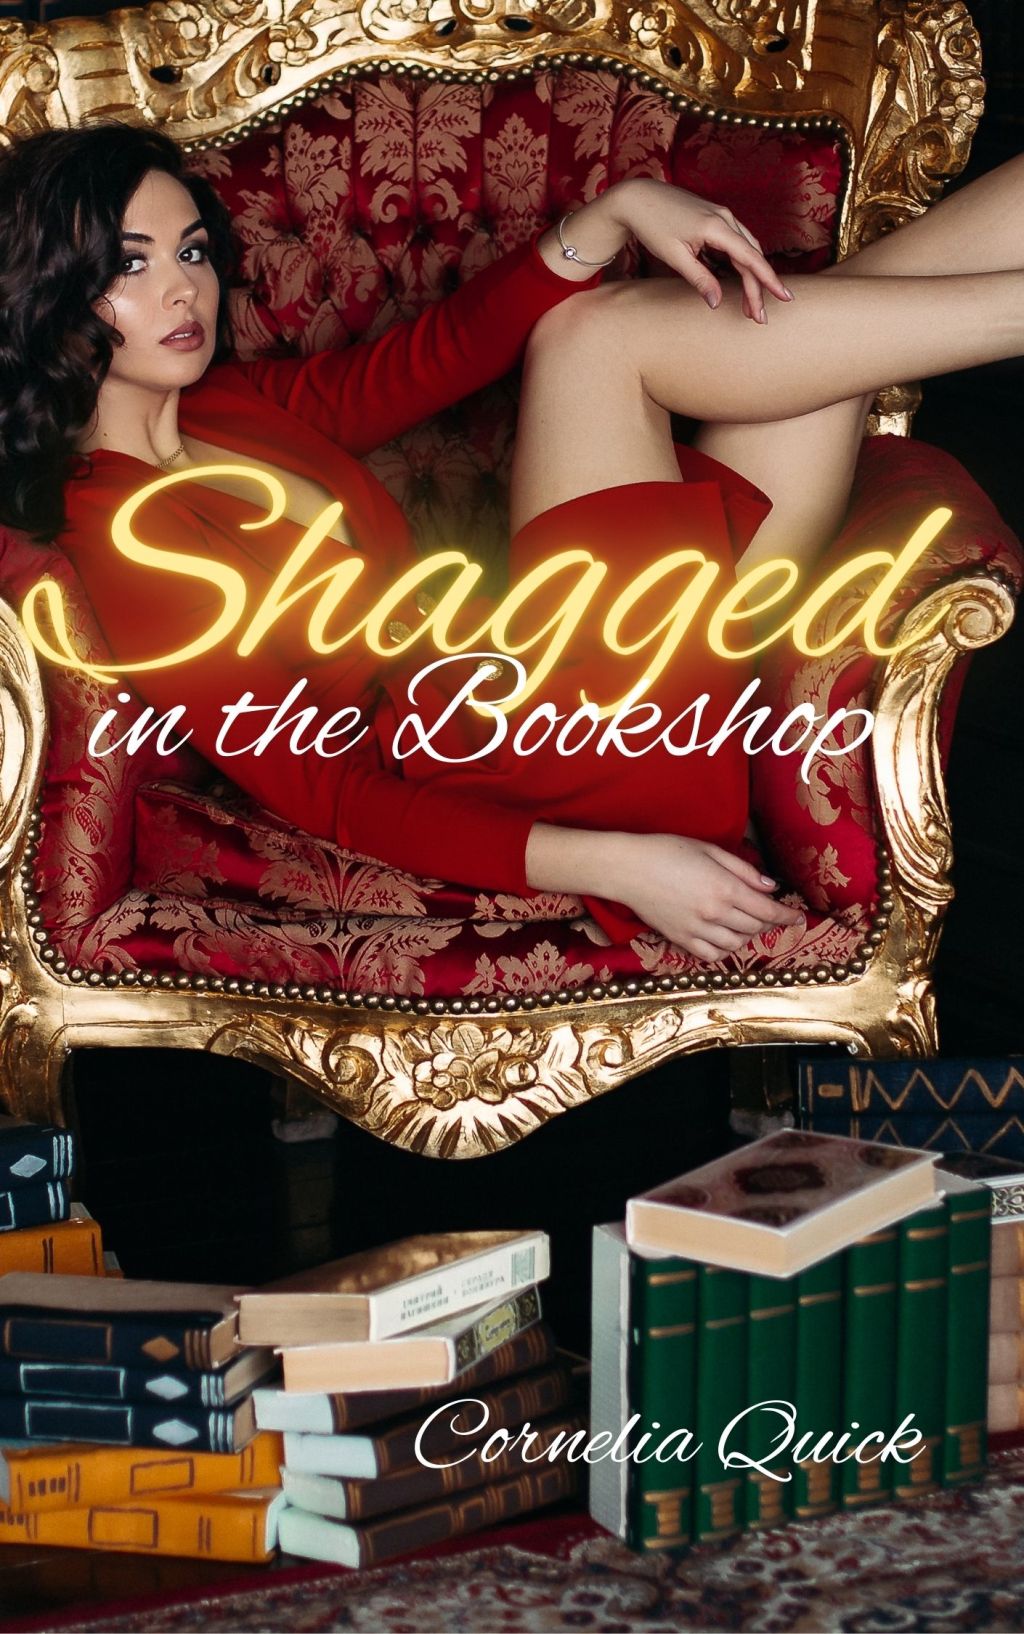 Get “Shagged in the Bookshop” FREE through March 4!